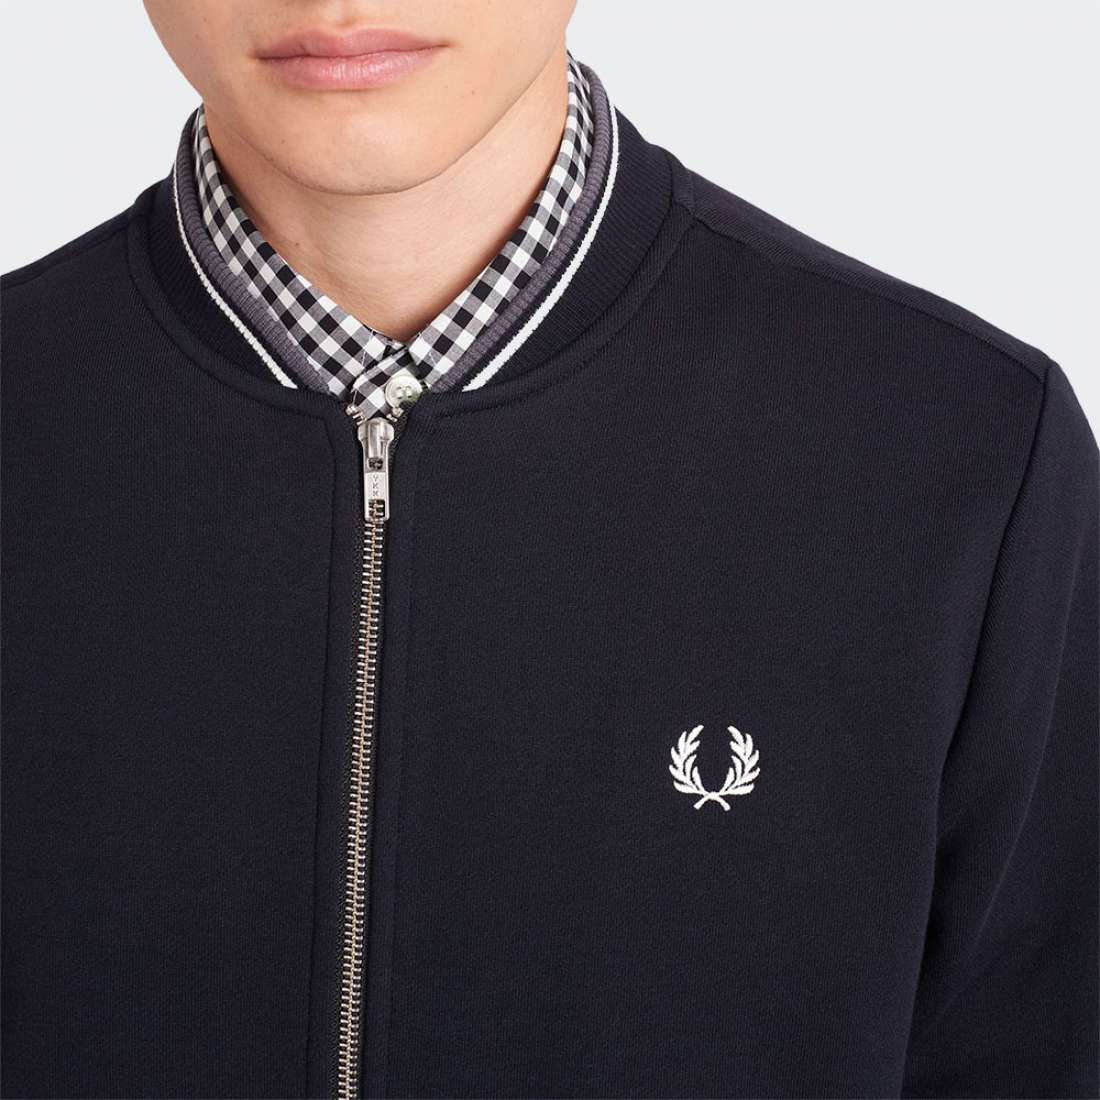 CASACO FRED PERRY J7504-184 BLACK